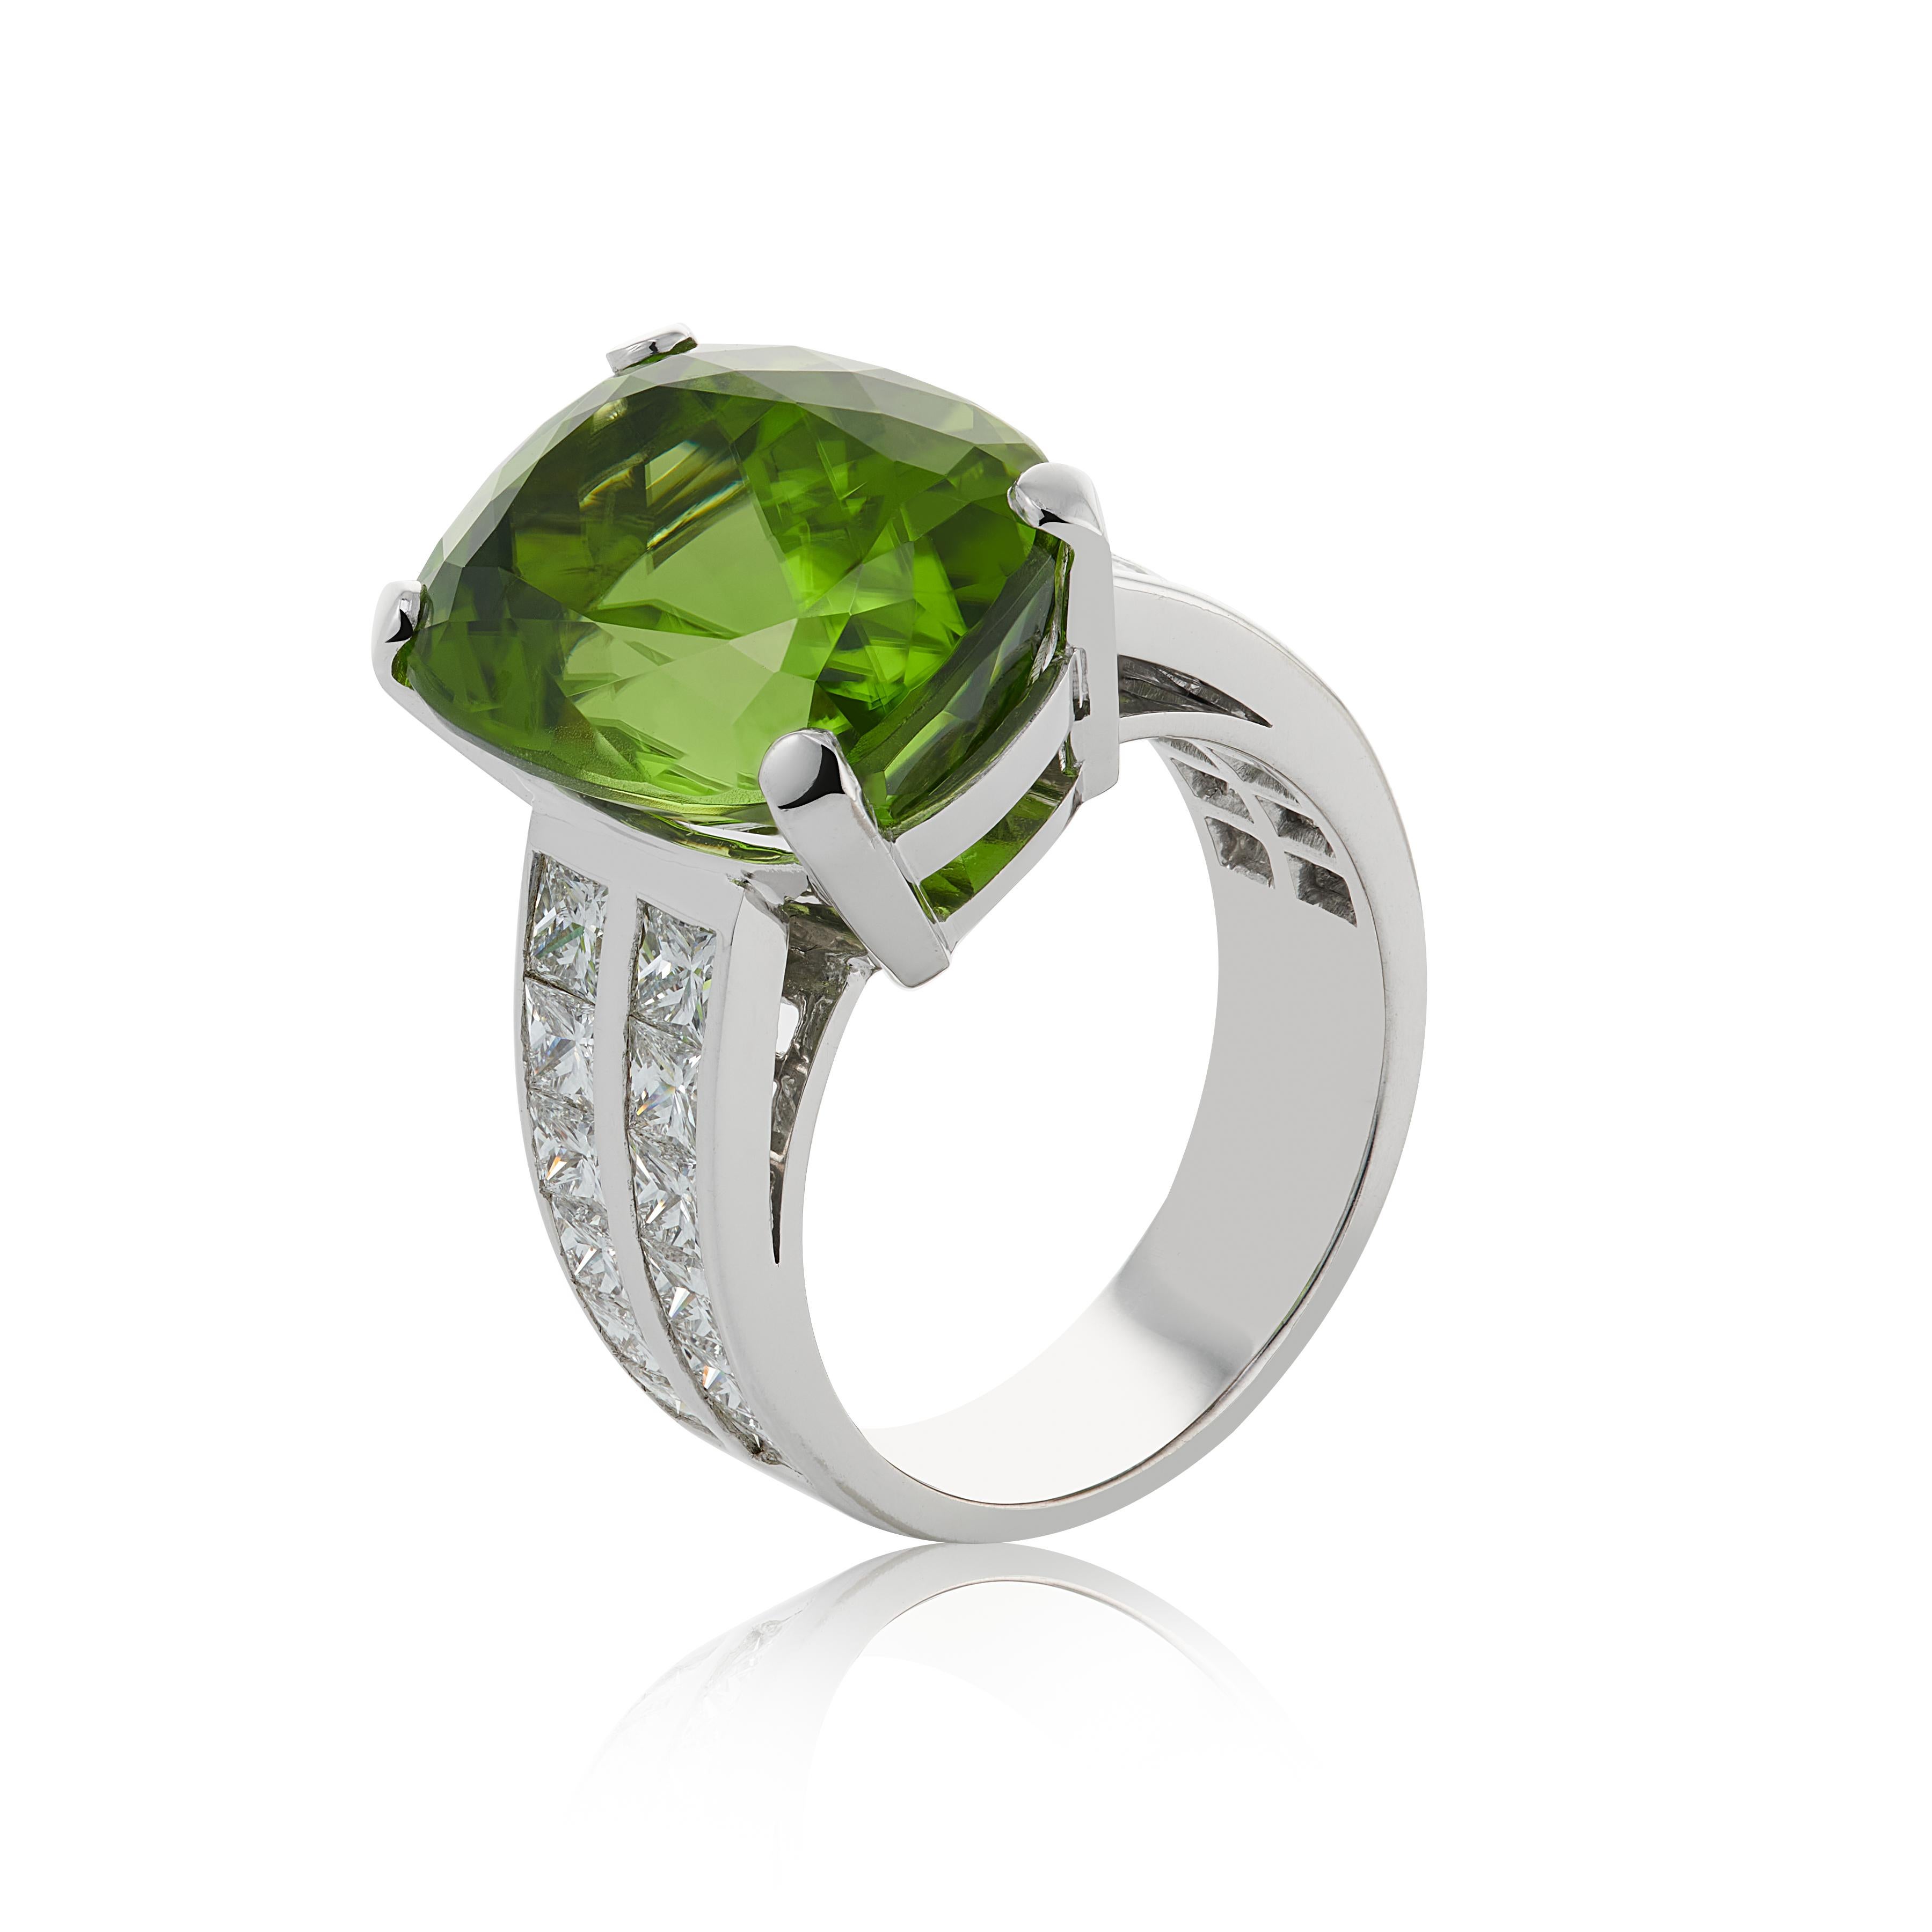 Contemporary E Wolfe & Co Handmade 18ct White Gold Peridot and Diamond Cocktail Ring